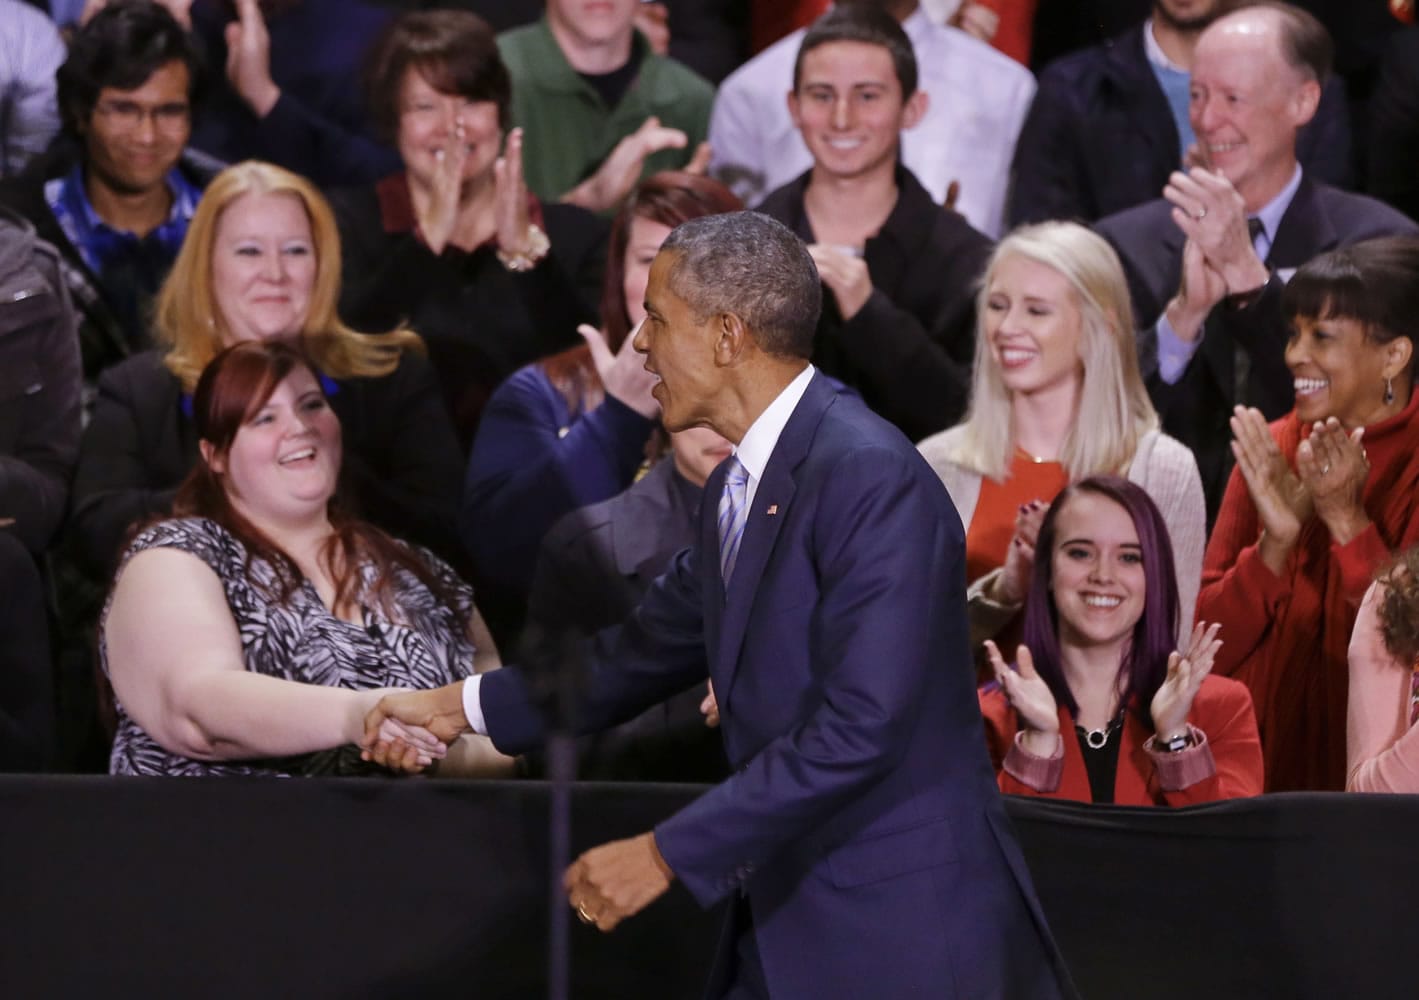 President Barack Obama greets people on stage as he arrives to speak at Pellissippi State Community College on Friday in Knoxville, Tenn.